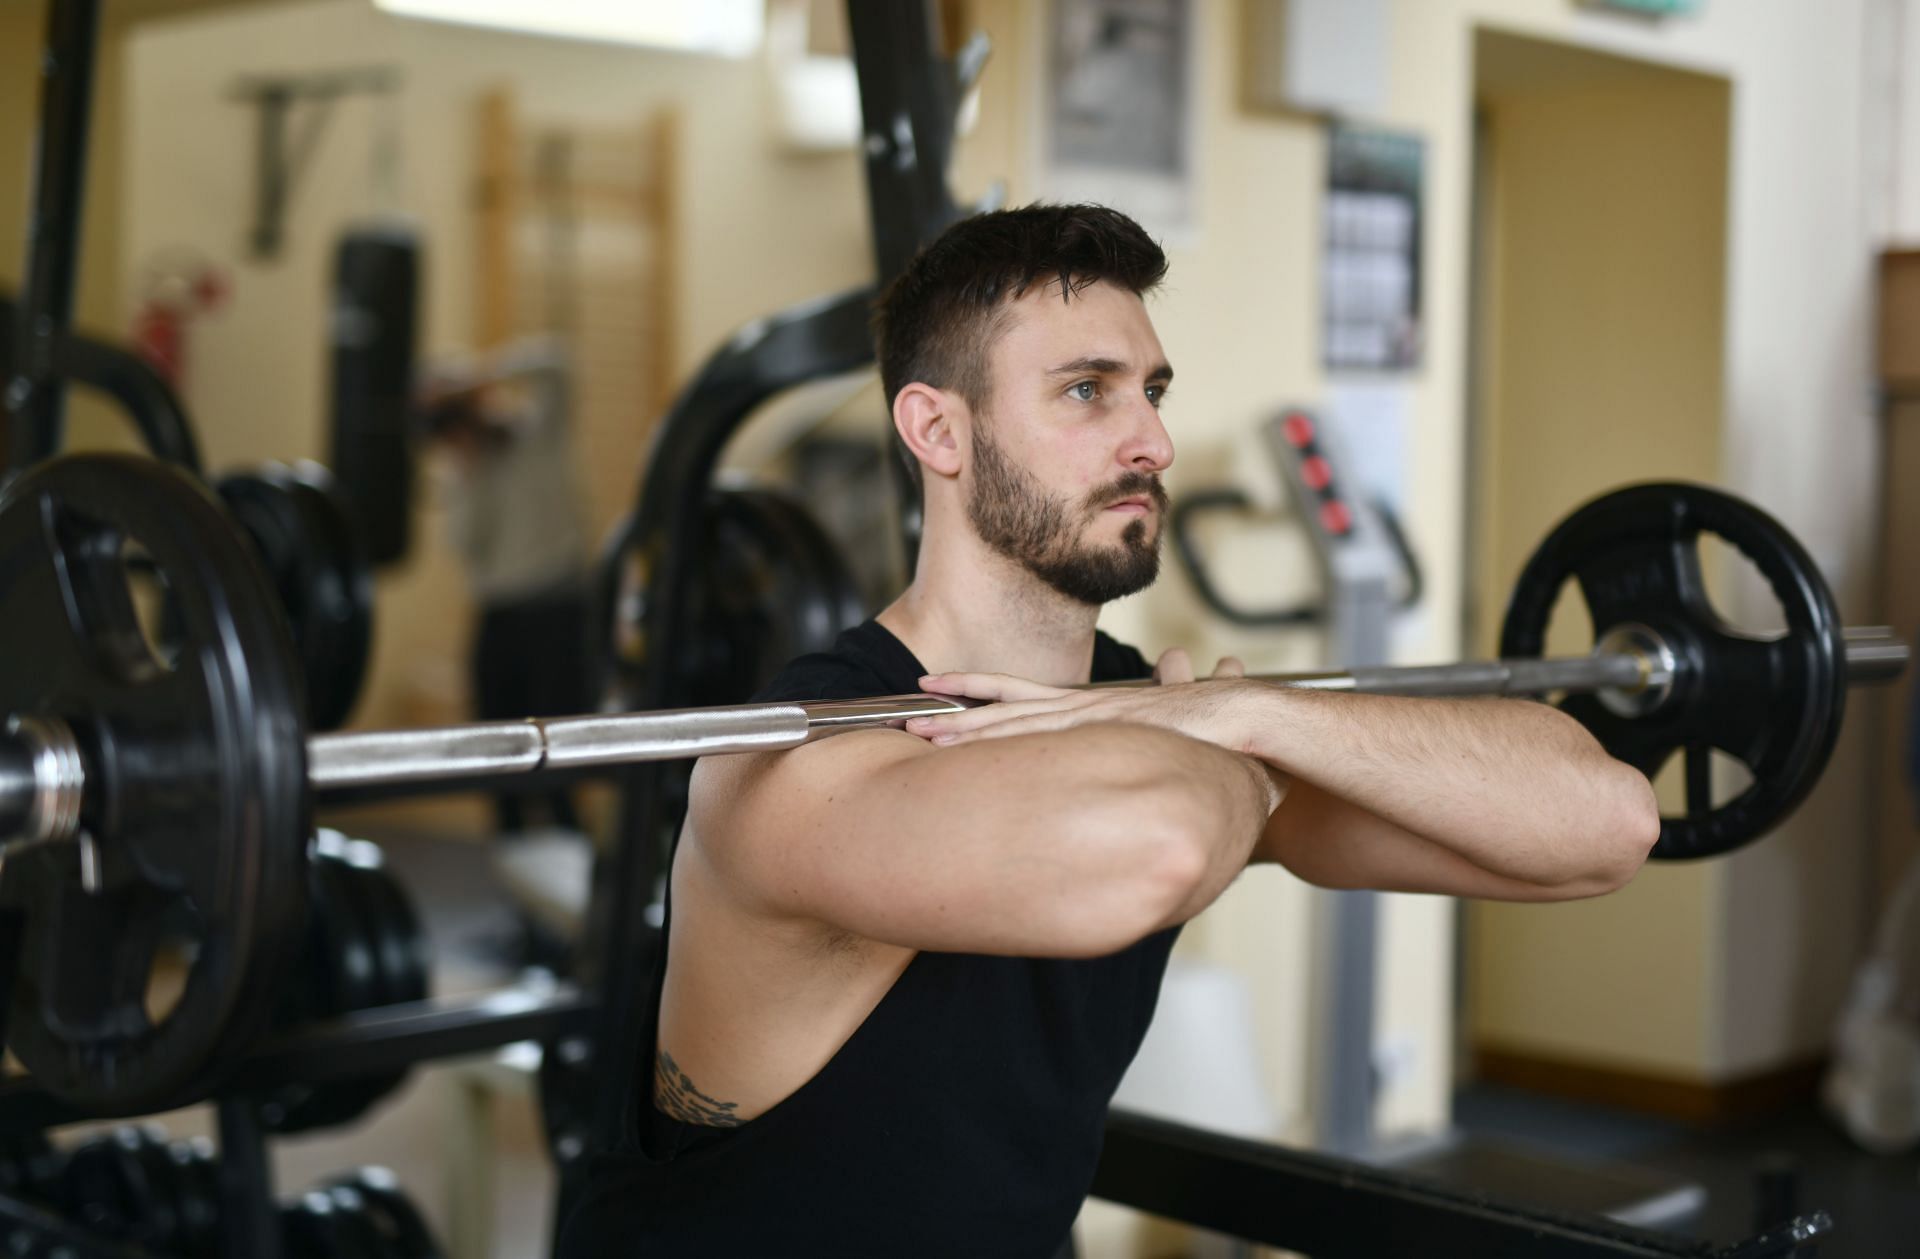 Best and effective exercises that men can do to build bigger traps. (Image via Pexels/Andrea Piacquadio)